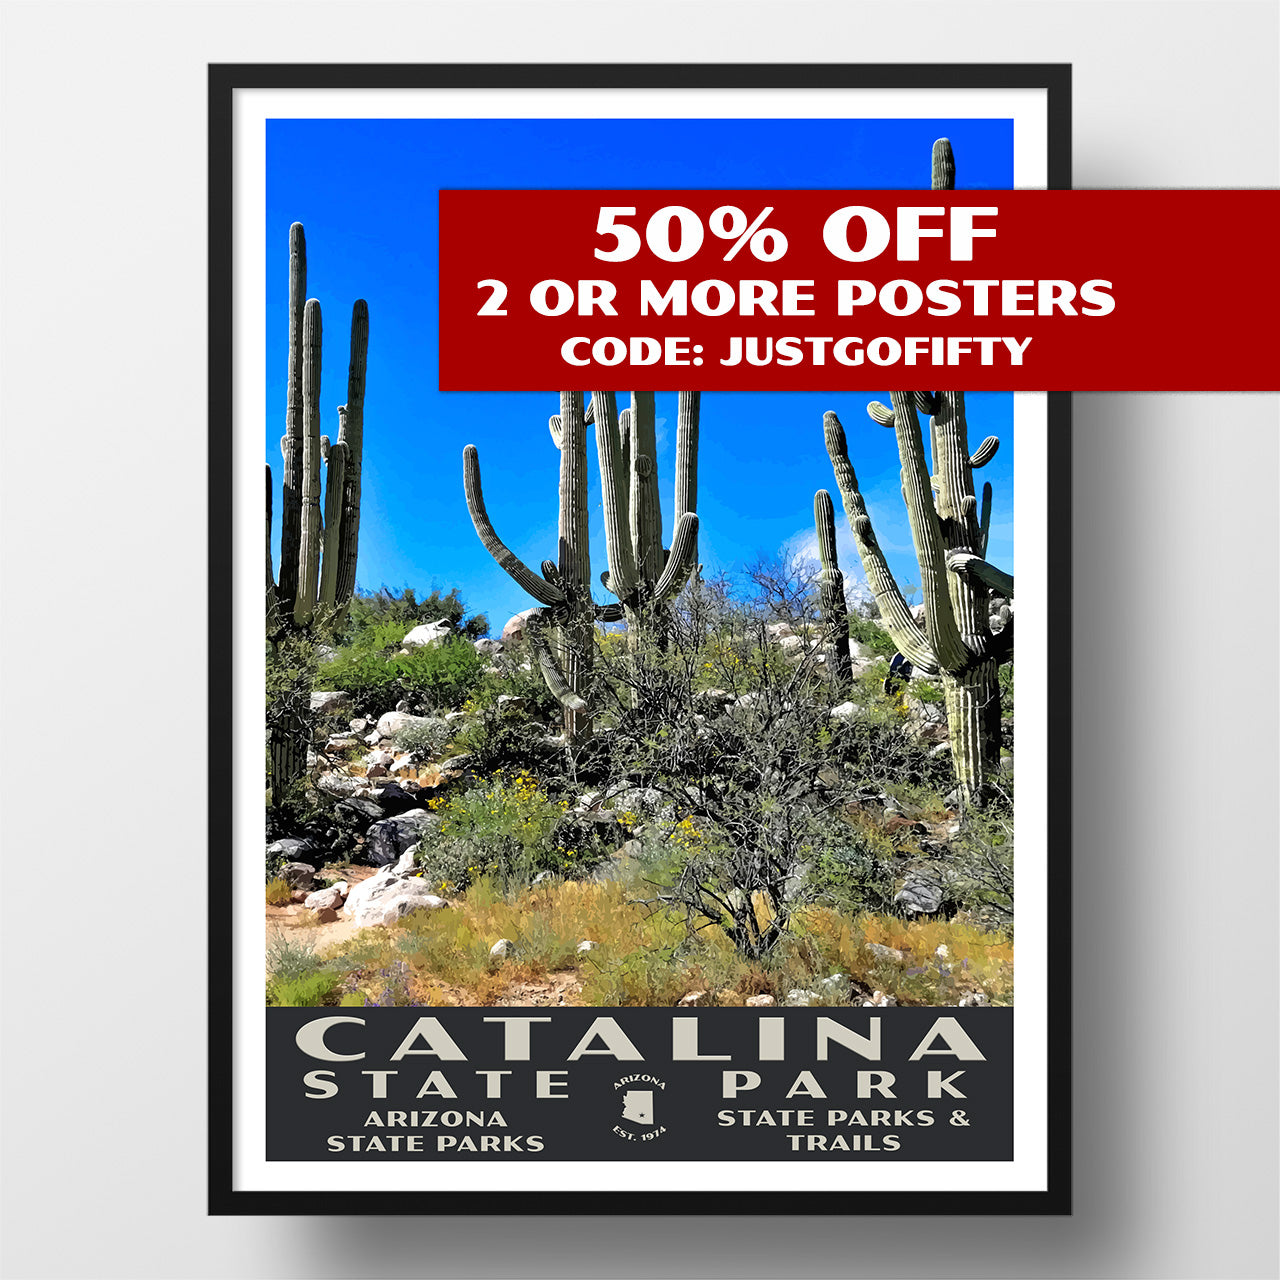 Catalina State Park poster